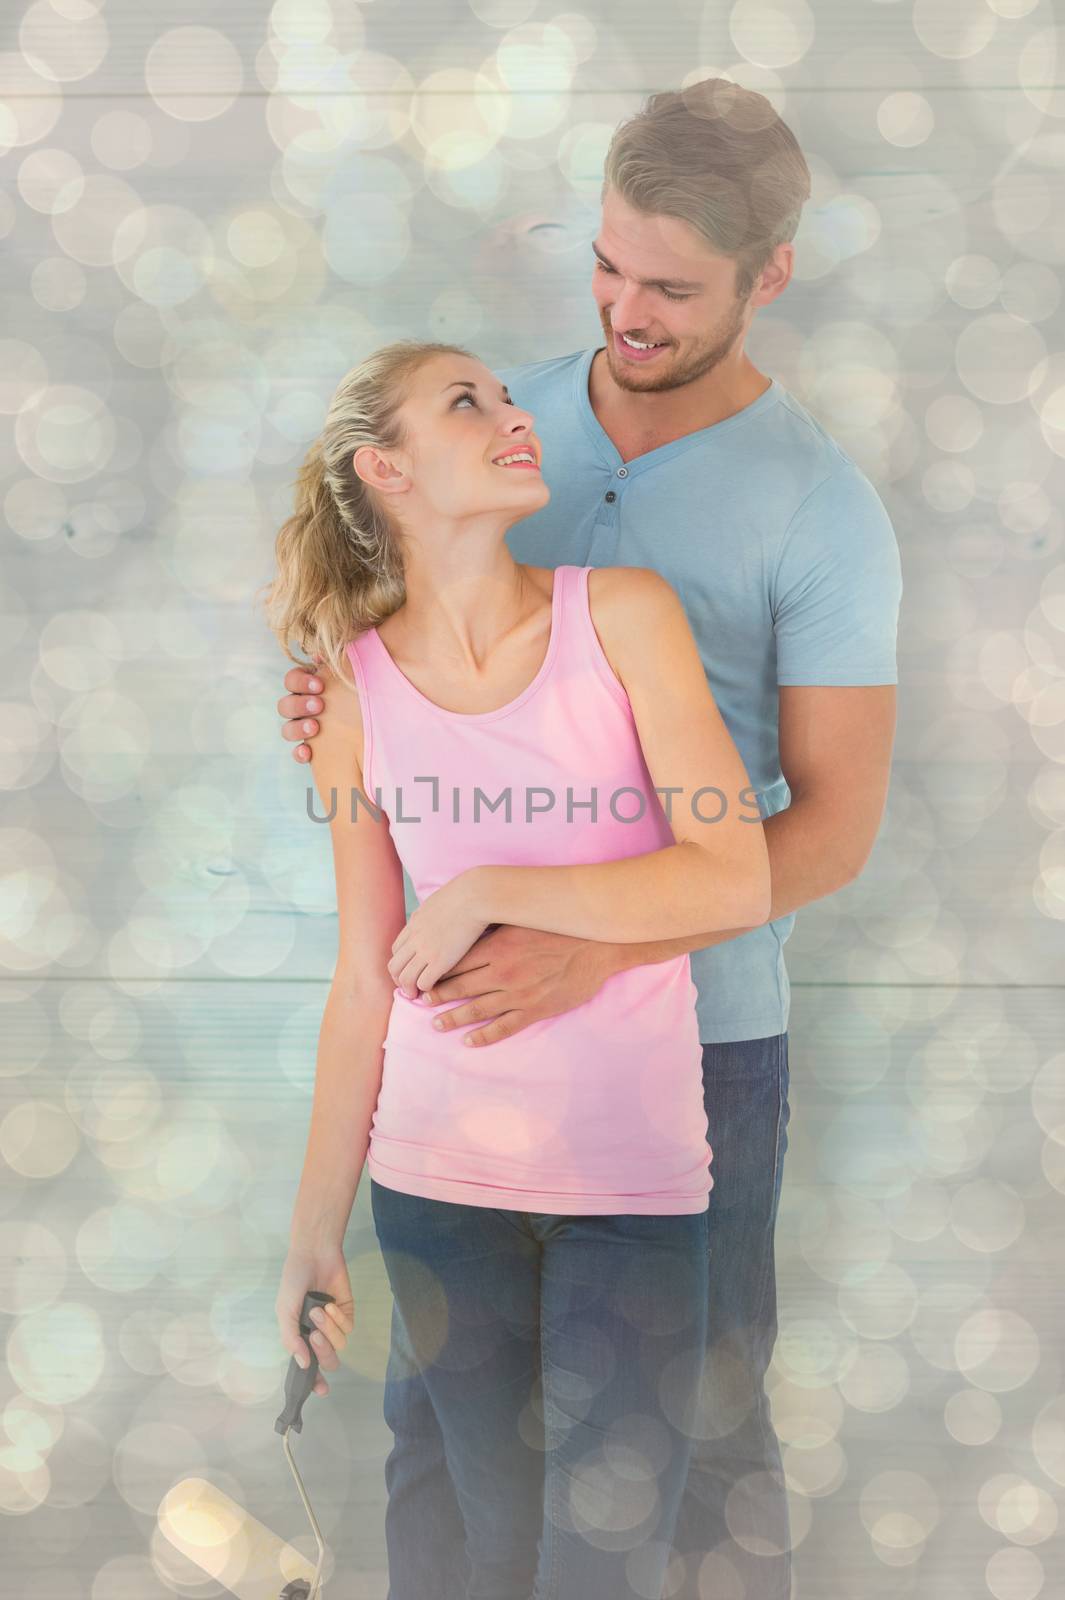 Young couple painting with roller against light glowing dots design pattern